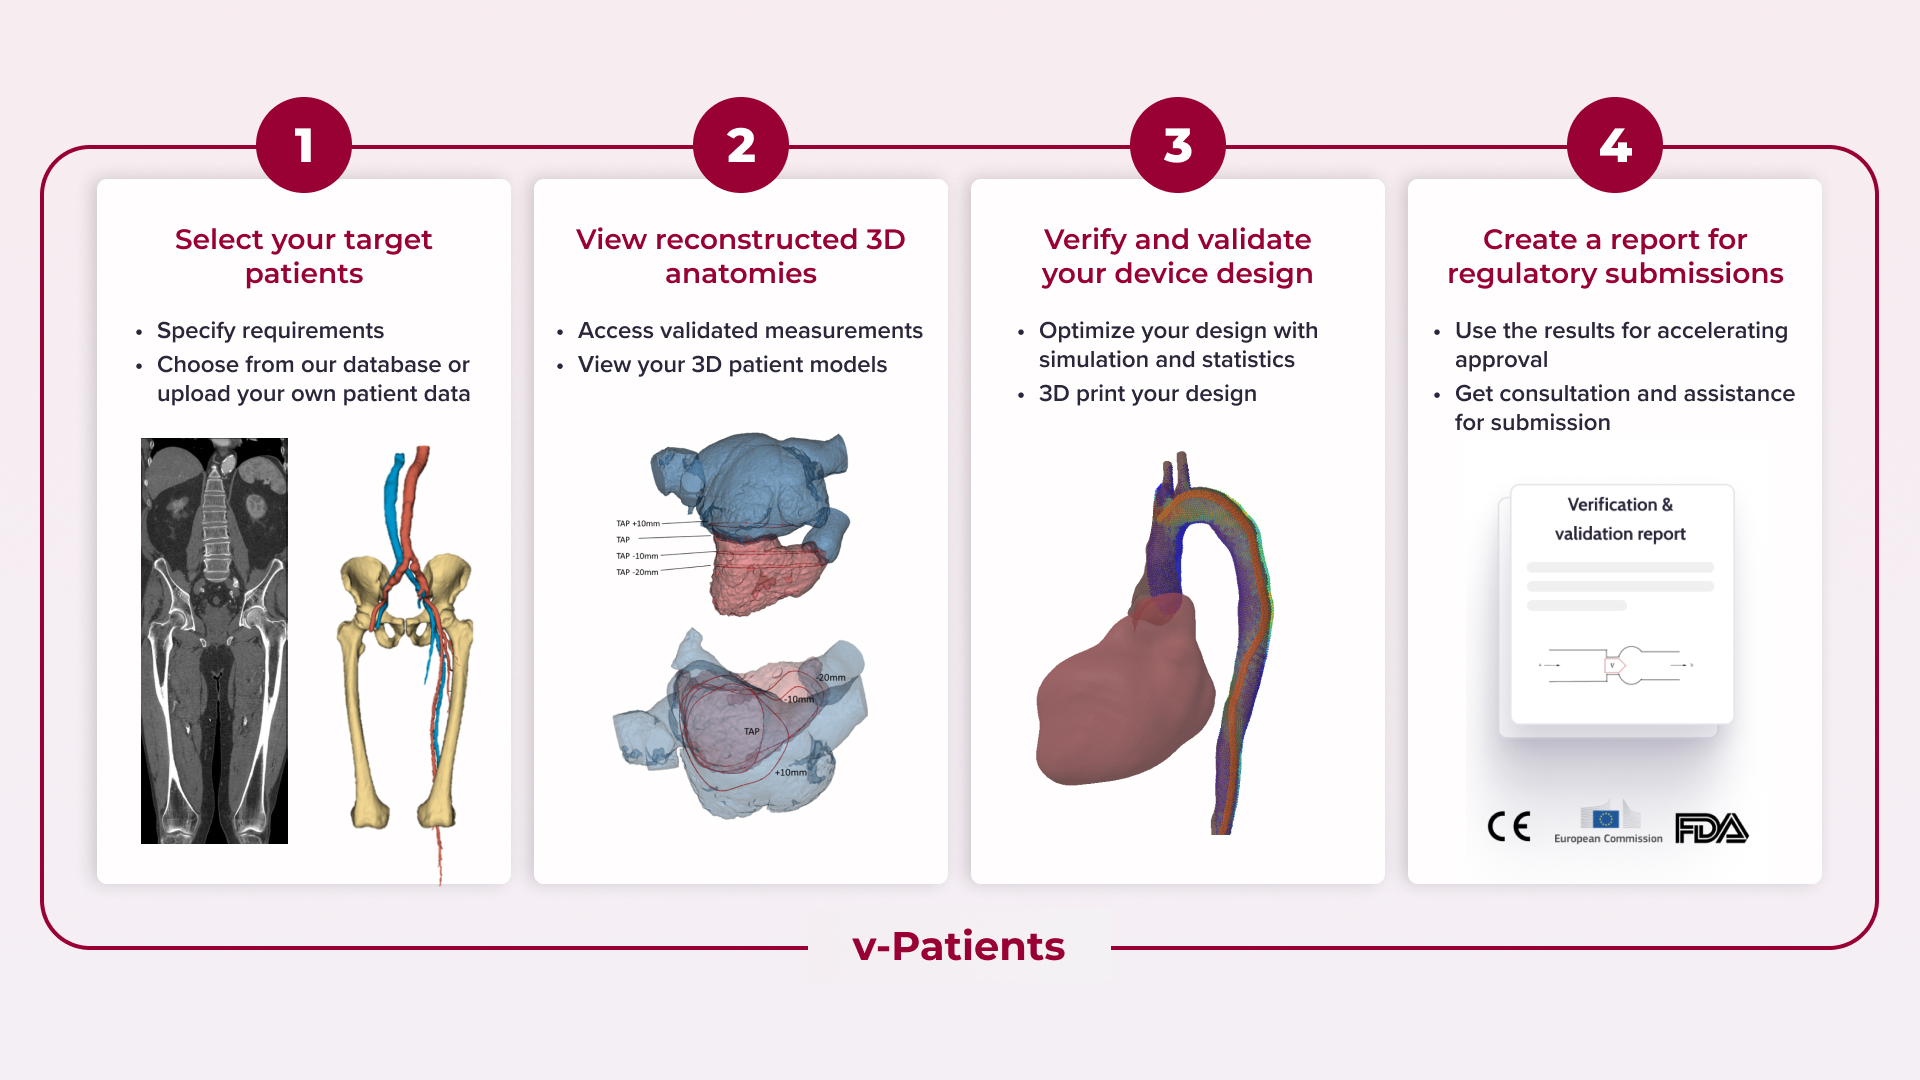 An inforgraphic showing the typical steps taken in Virtonomy's software: Selecting virtual patients, getting 3D models, verifying and validating catheter design, and receiving a report for regulatory submission